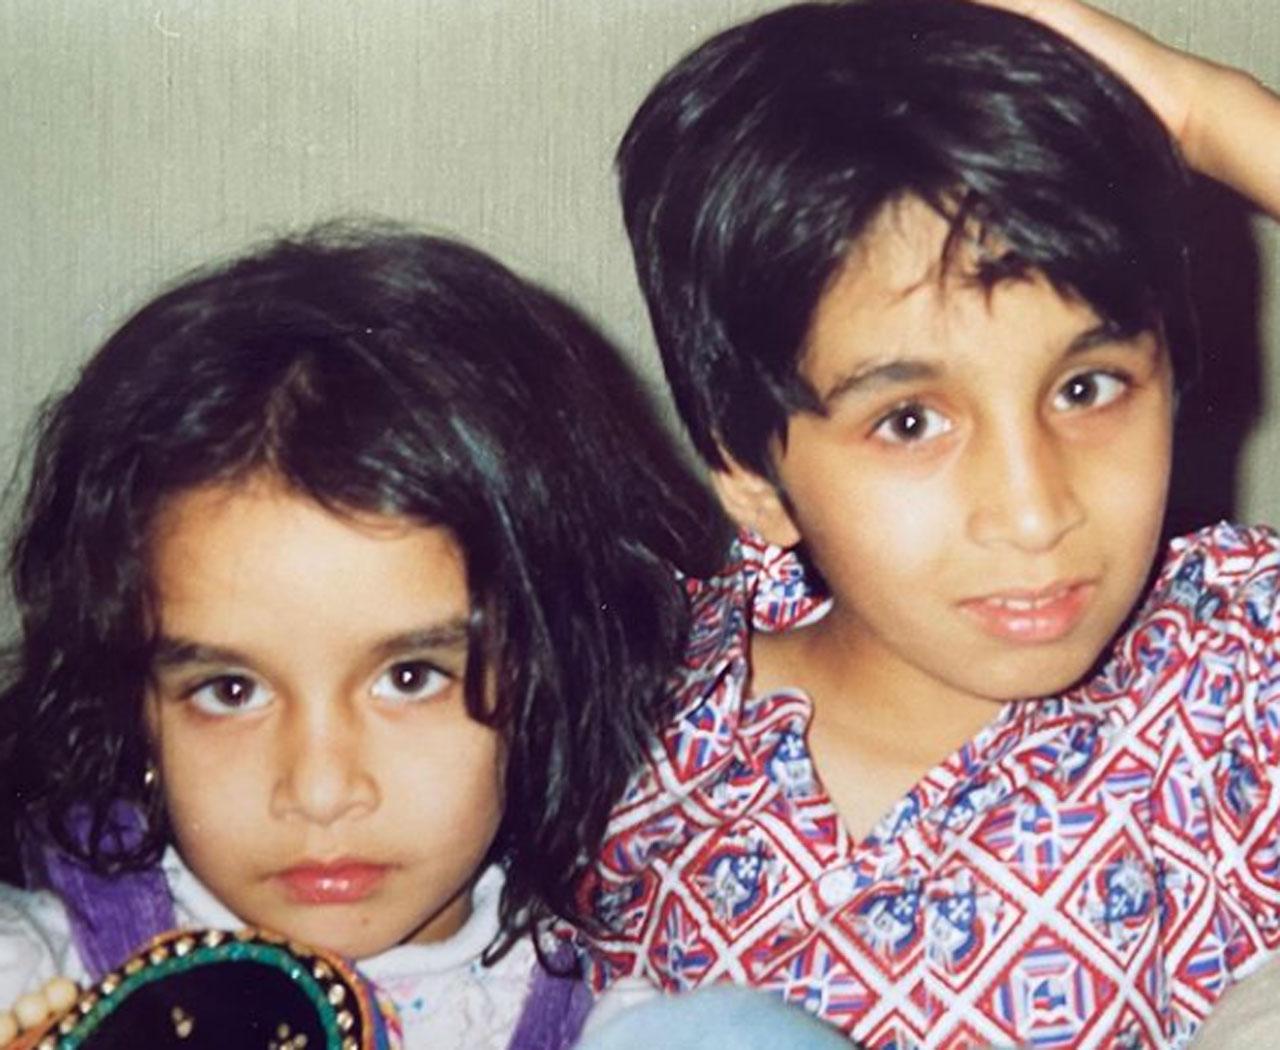 Shraddha shared a picture with her brother Siddhanth Kapoor to wish her on his birthday. Sharing an adorable picture, the actress wrote- 